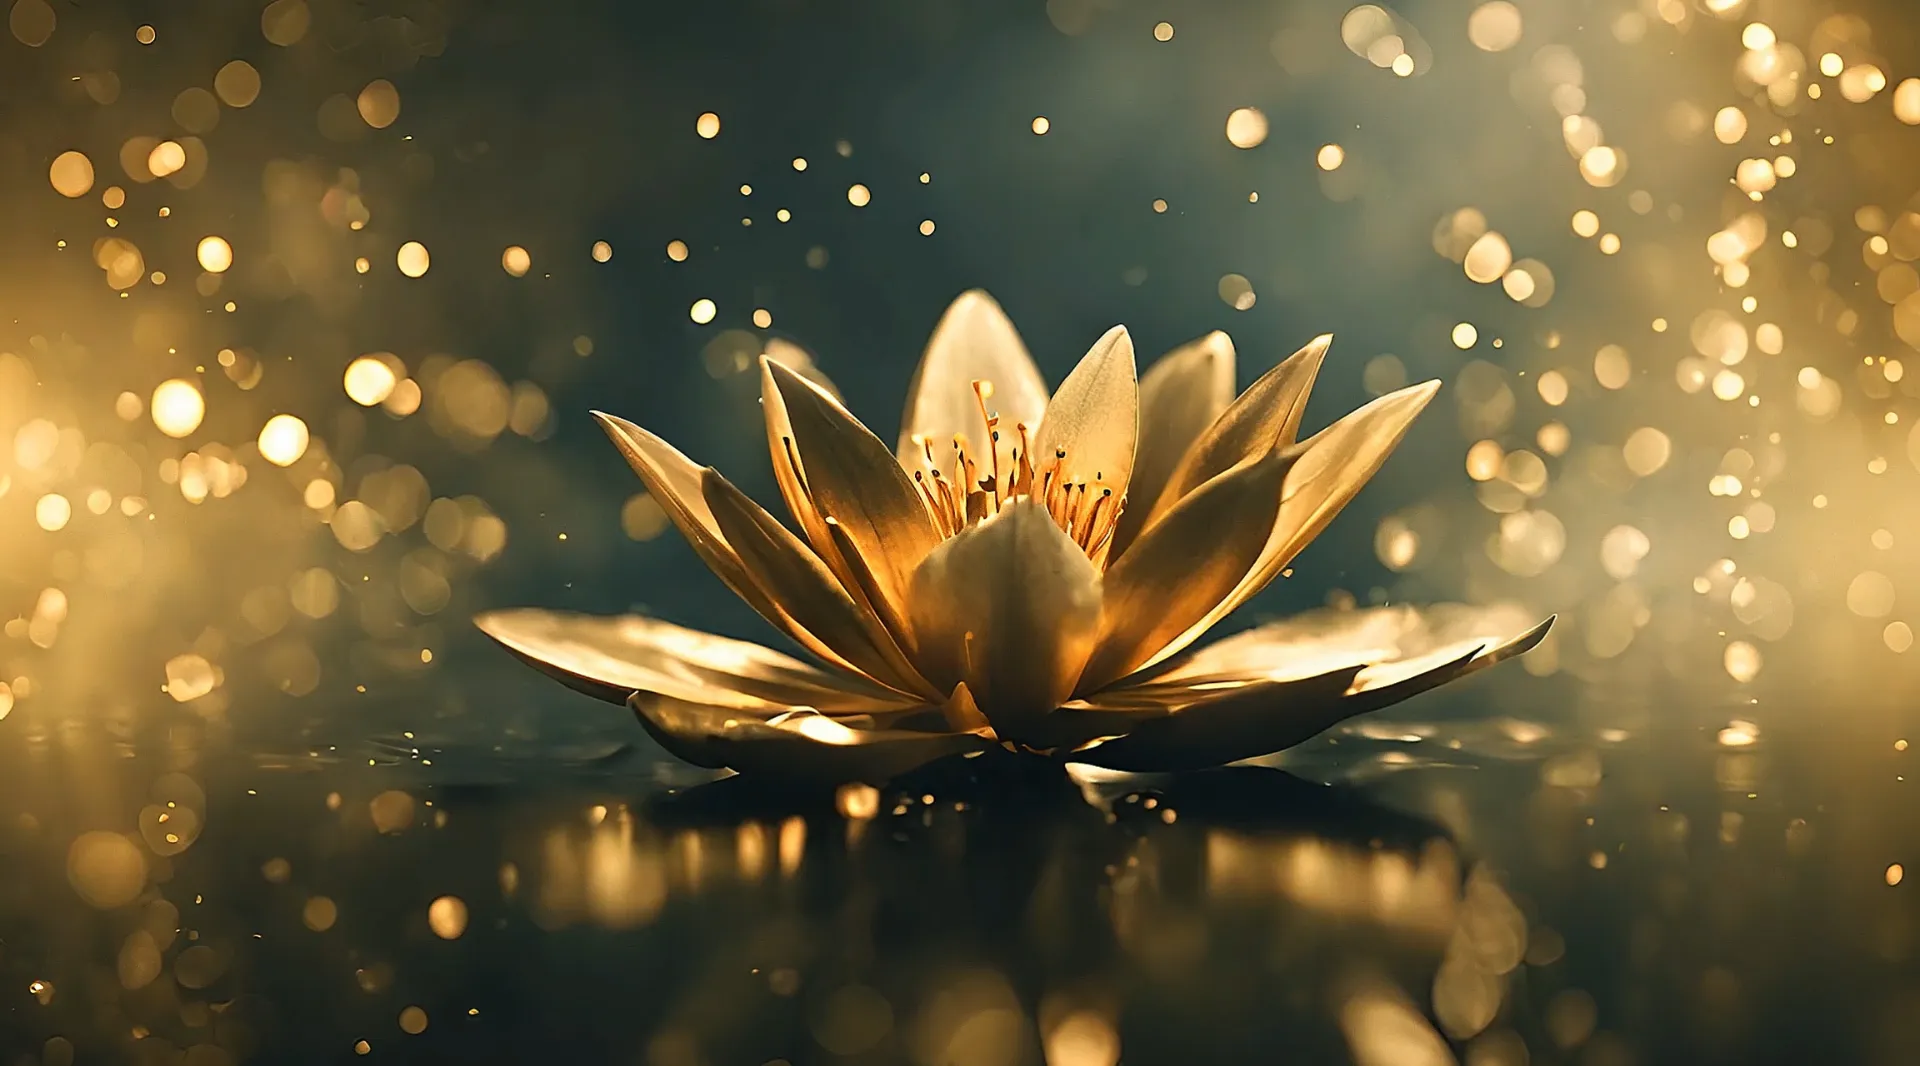 Golden Lotus Enlightenment Peaceful Floral Motion Graphic Video